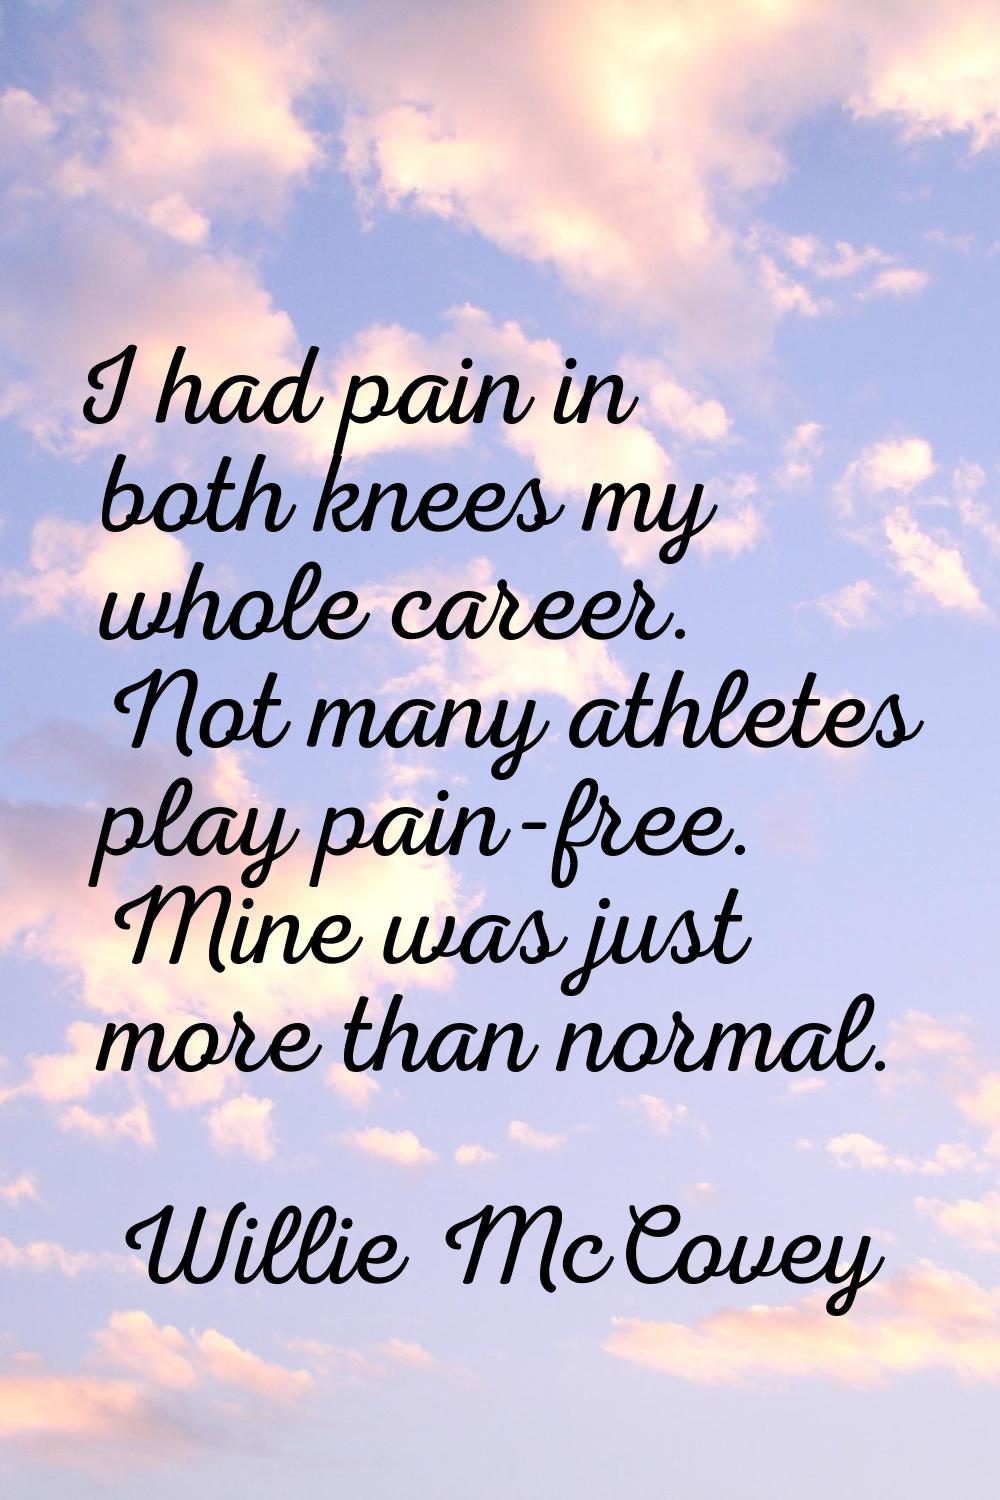 I had pain in both knees my whole career. Not many athletes play pain-free. Mine was just more than